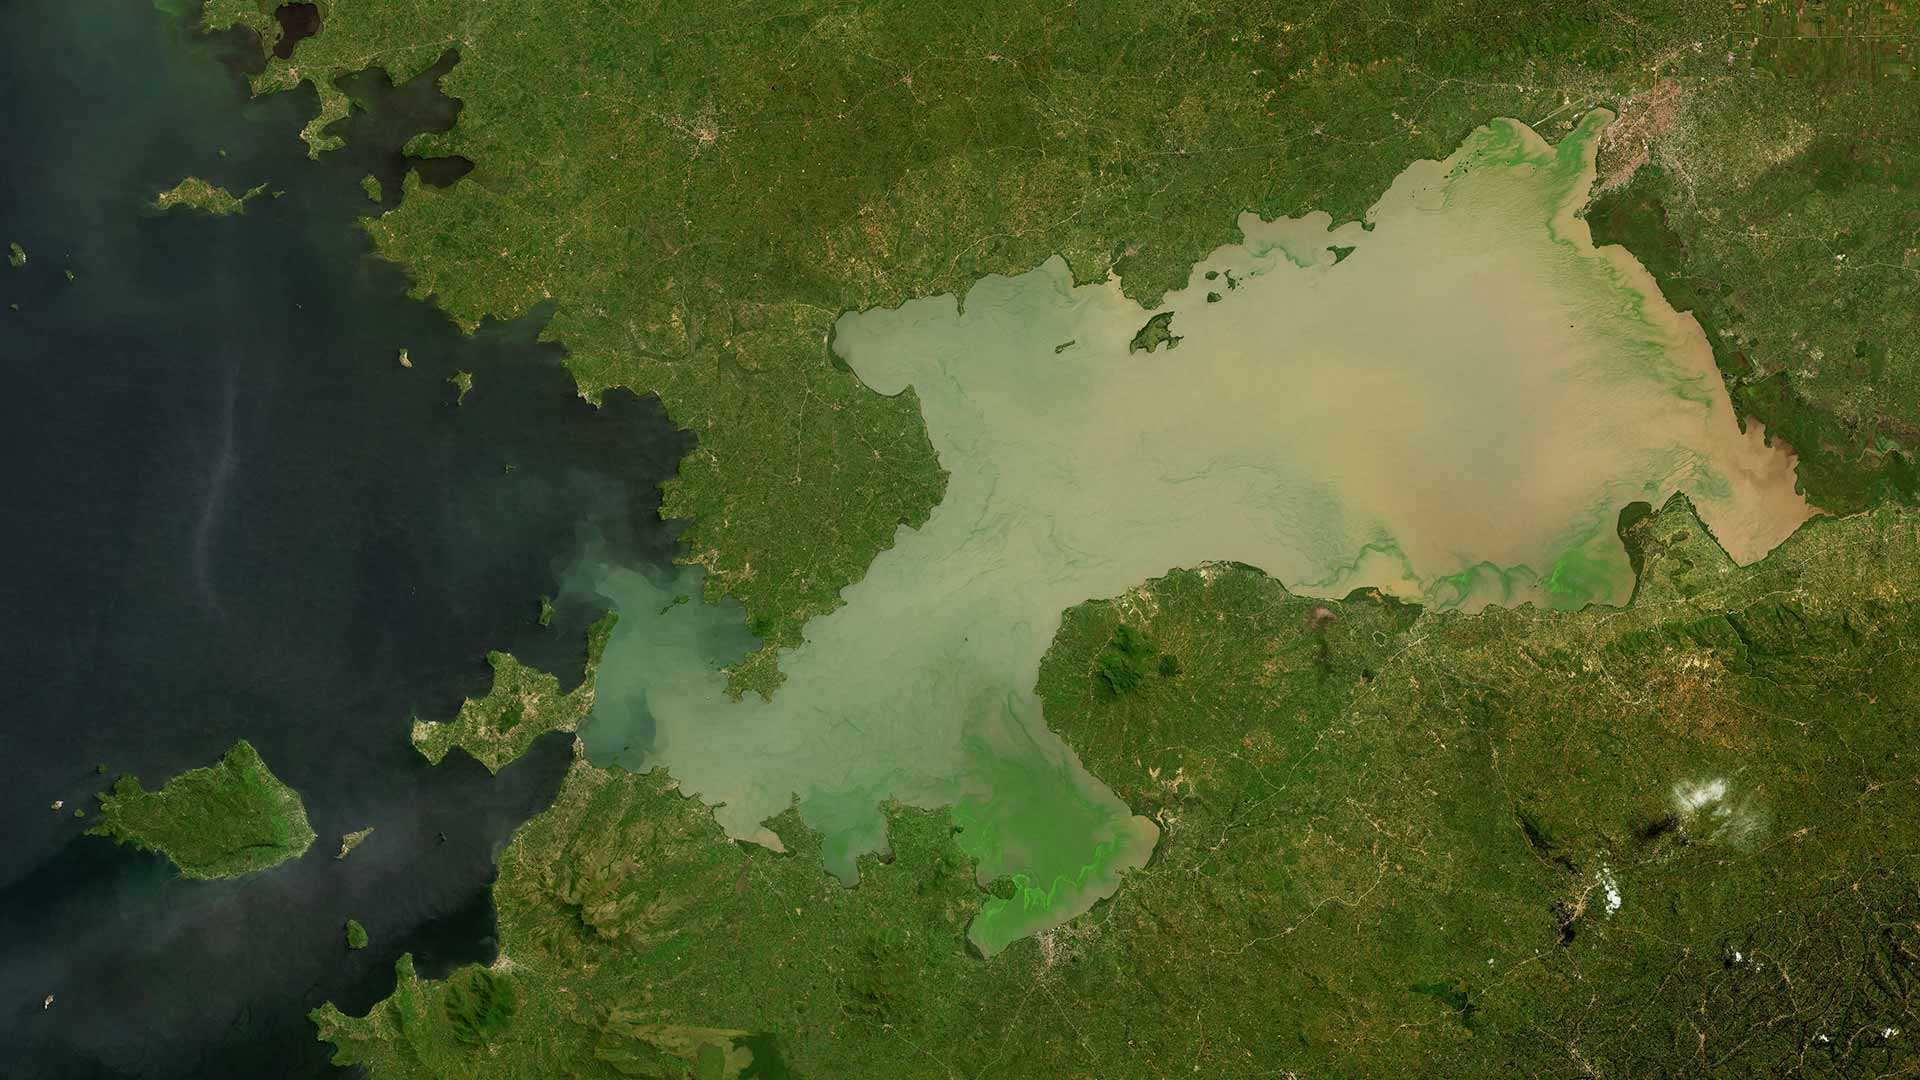 The water level of Lake Victoria in central Africa